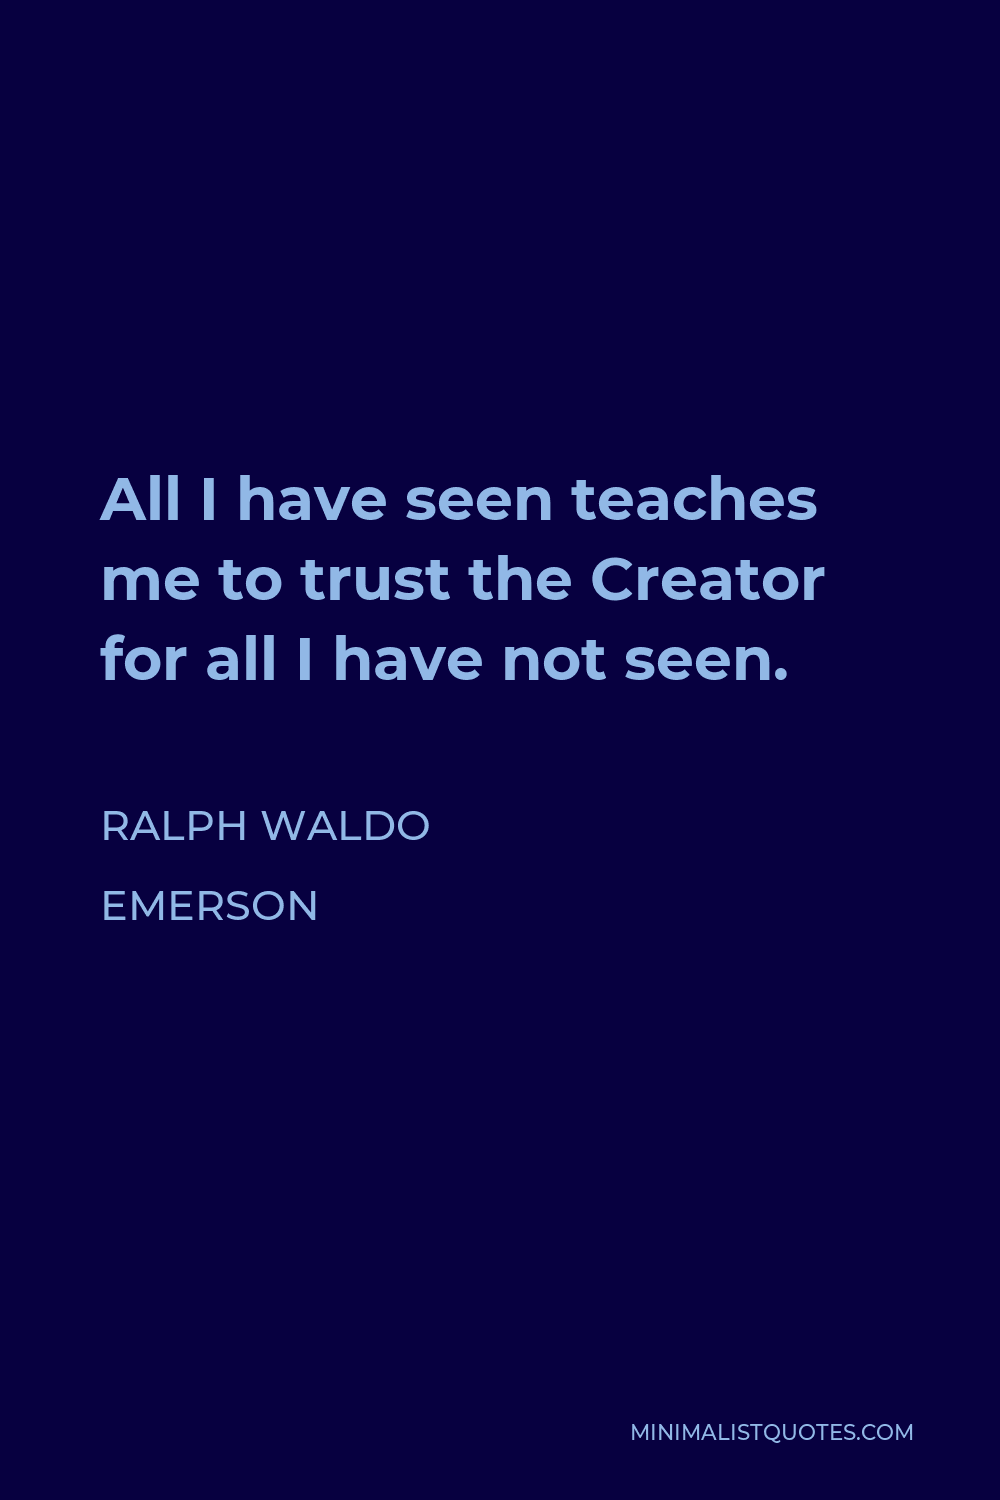 Ralph Waldo Emerson Quote - All I have seen teaches me to trust the Creator for all I have not seen.